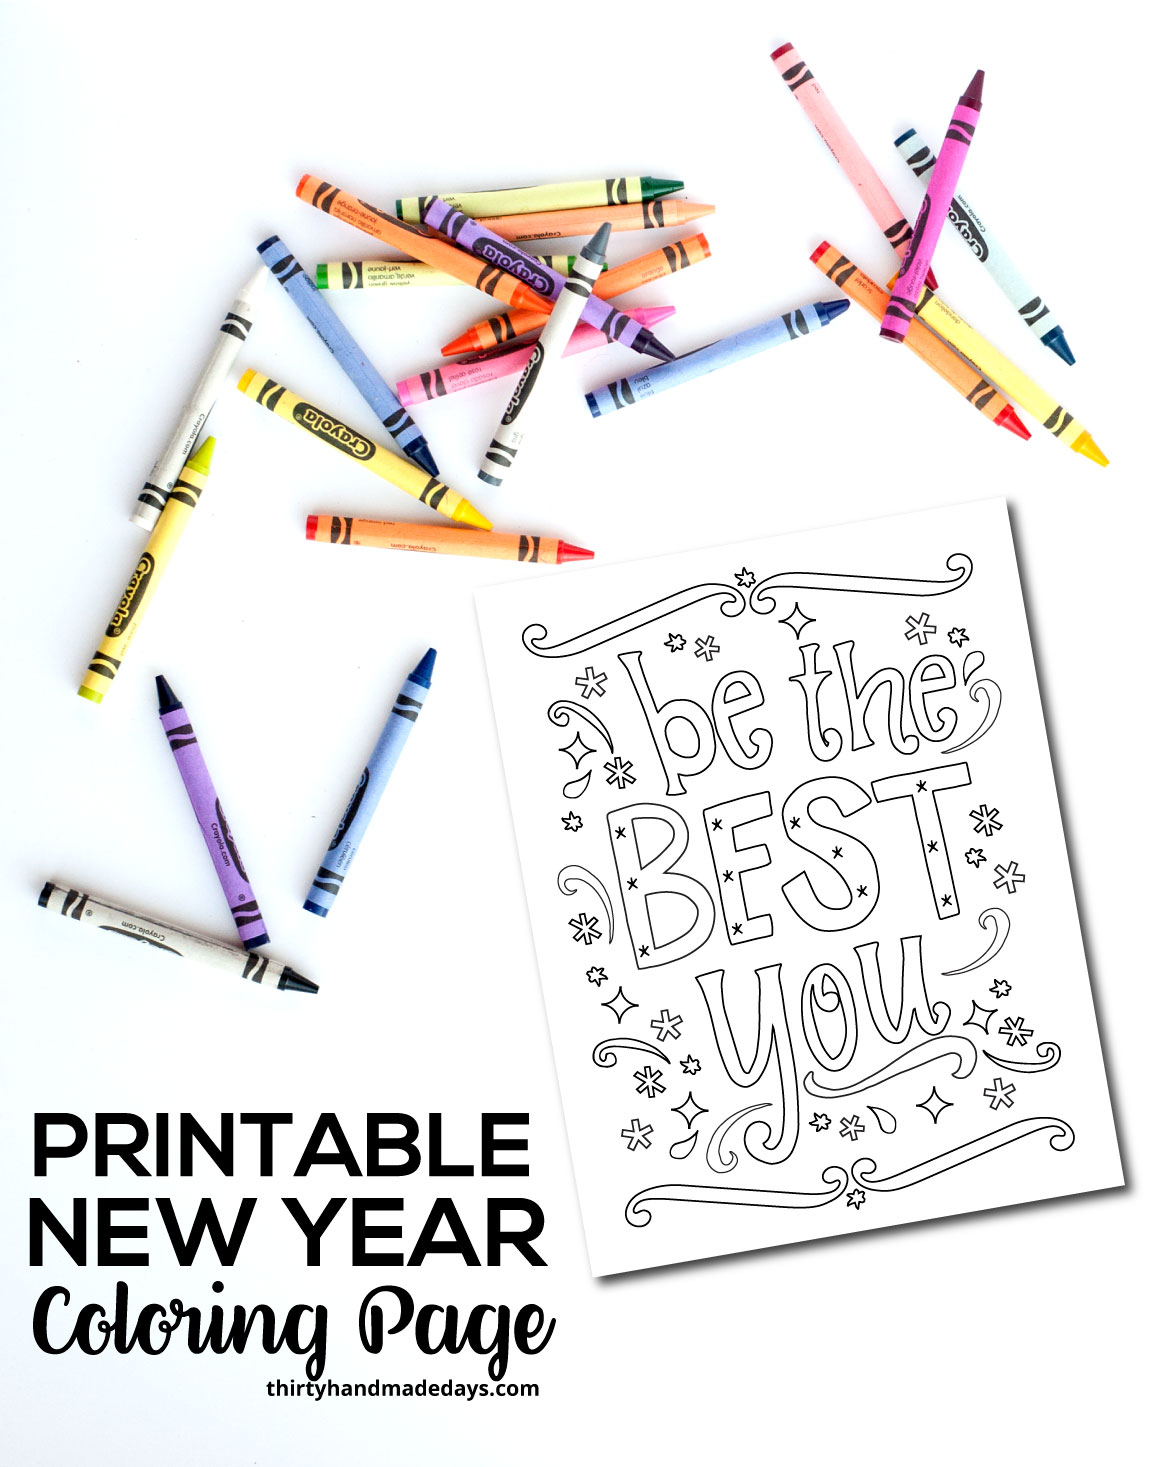 Holidays: Printable New Year Coloring Page - Be the Best You! Start off the new year with a bang! www.thirtyhandmadedays.com